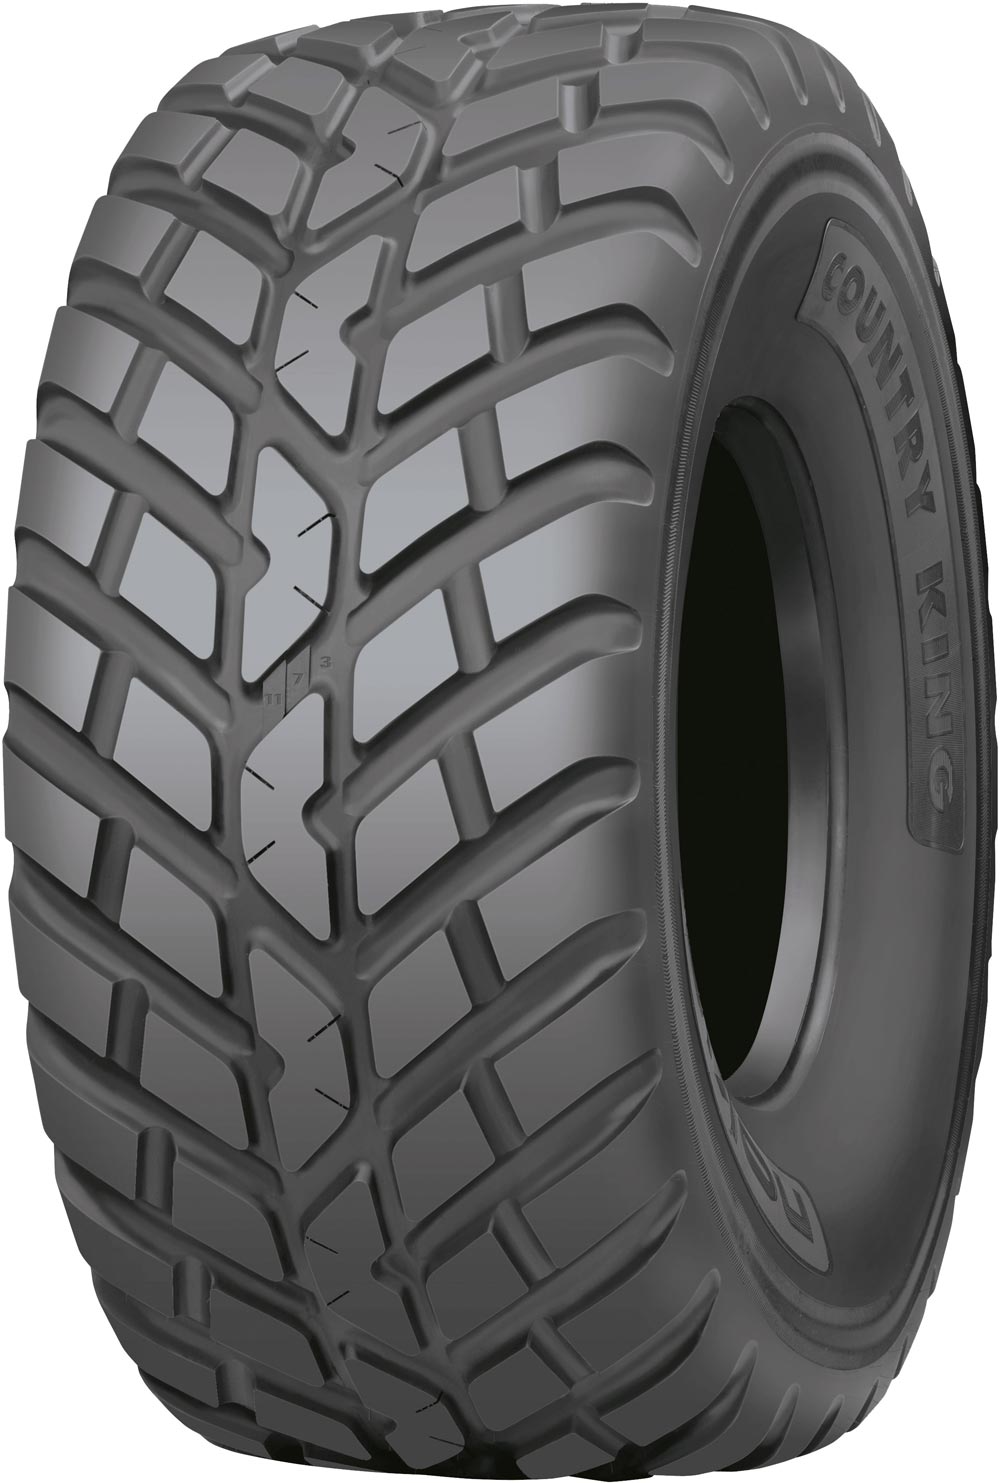 Индустриални гуми NOKIAN COUNTRY KING TL 650/65 R30.5 176D